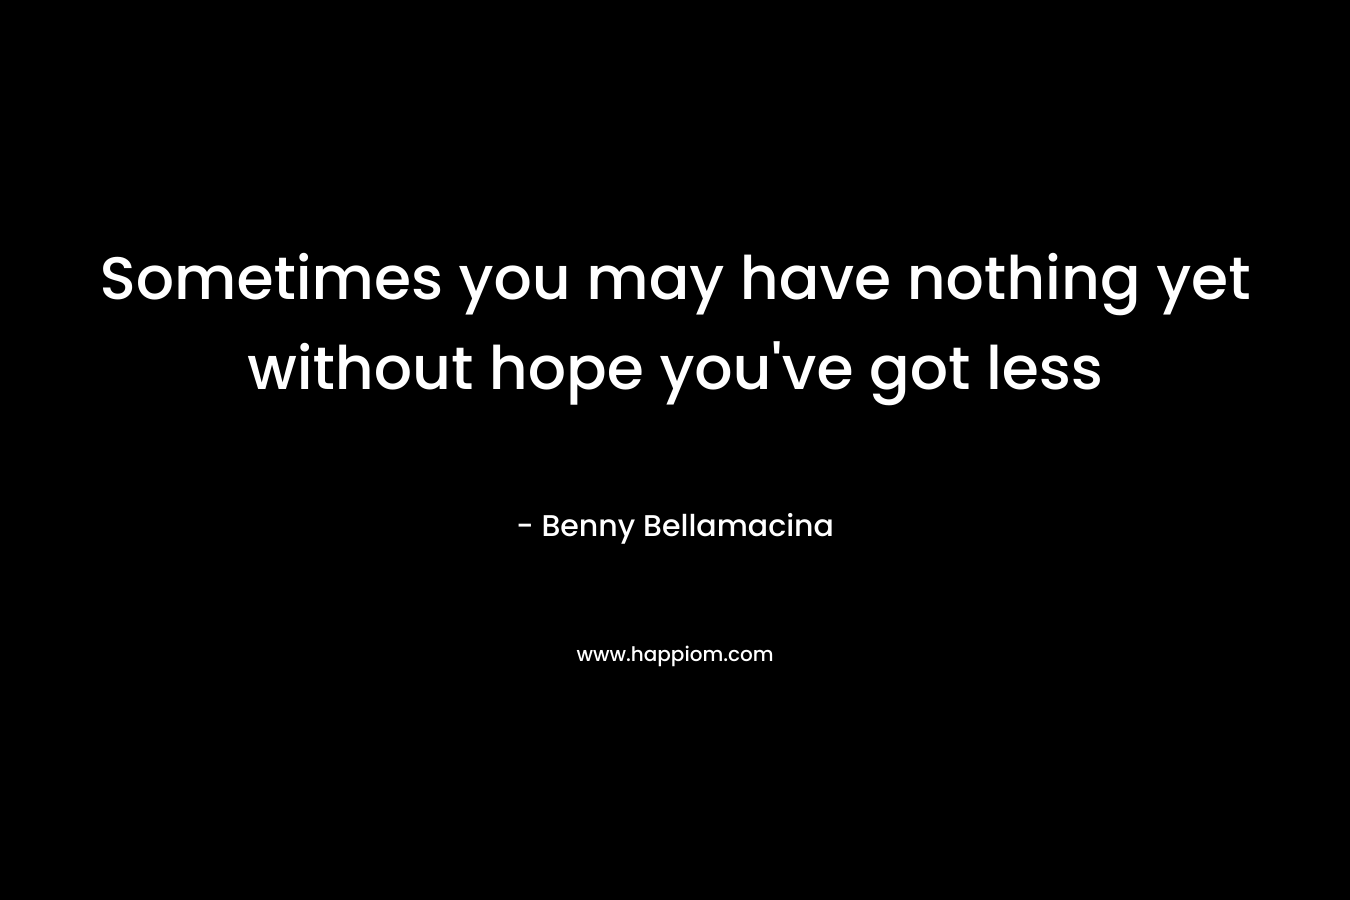 Sometimes you may have nothing yet without hope you've got less